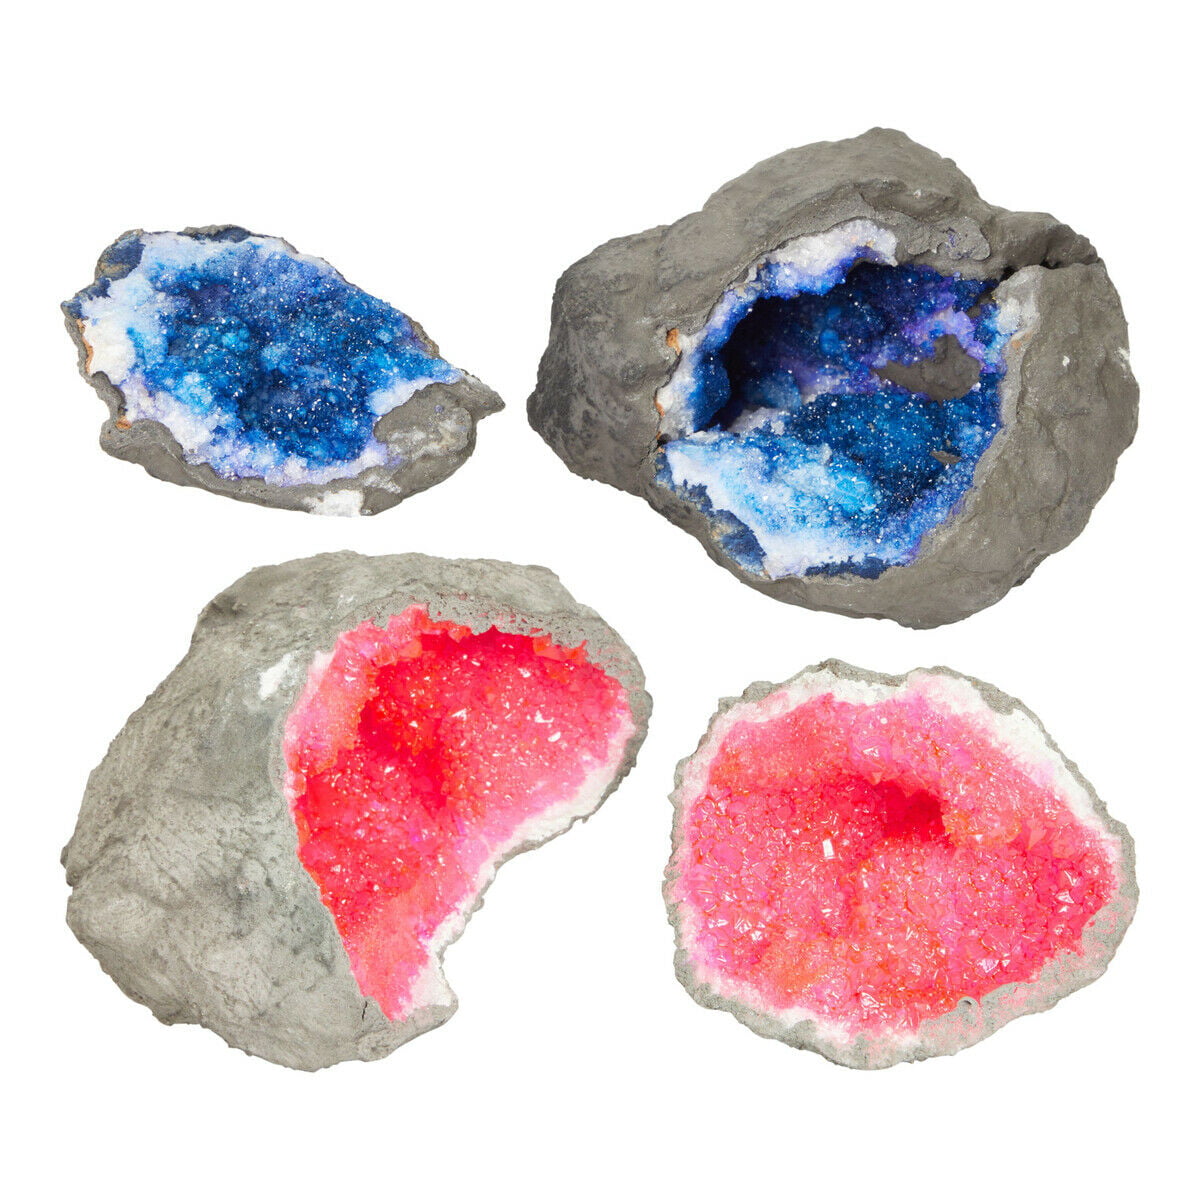 How to Make Geodes and Crystals With Your Kids